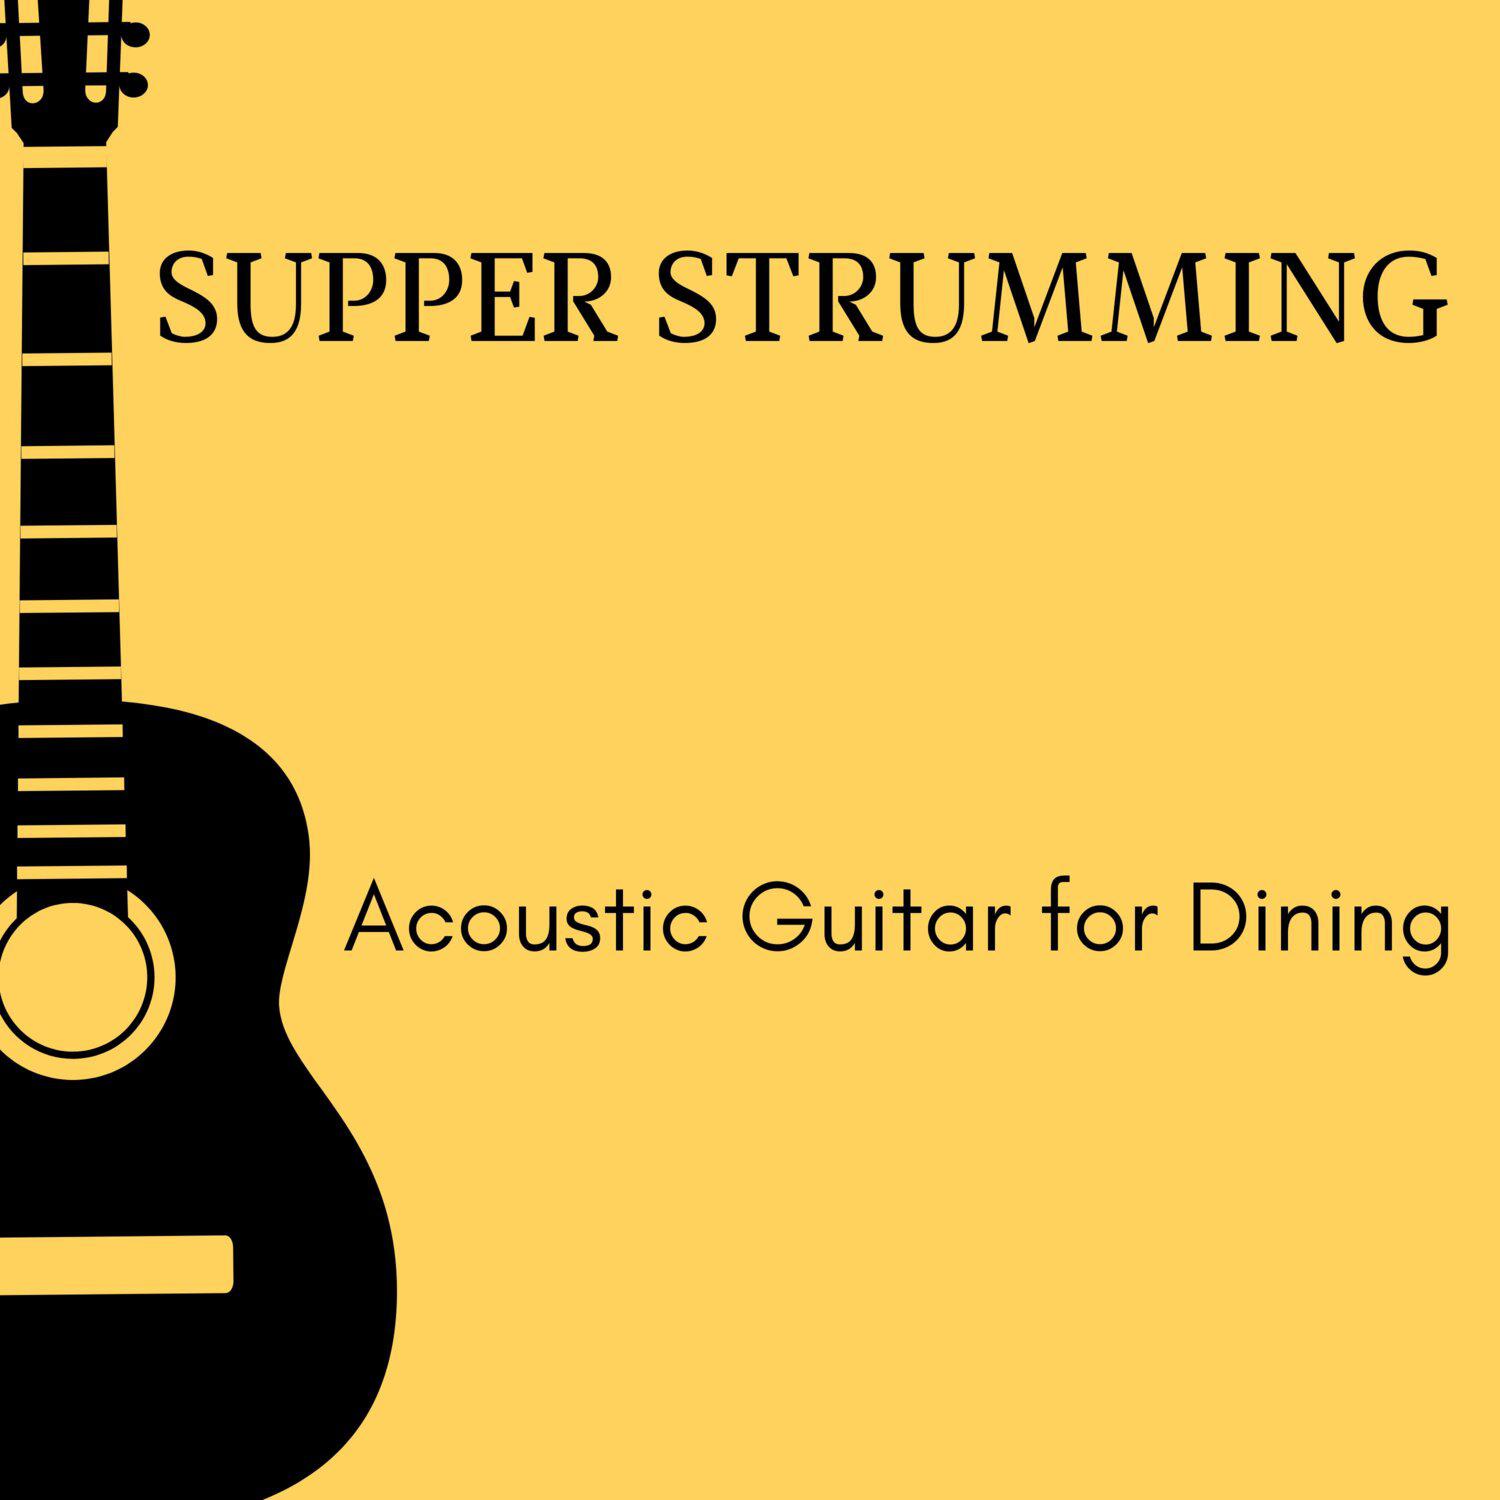 Постер альбома Supper Strumming - Acoustic Guitar for Dining